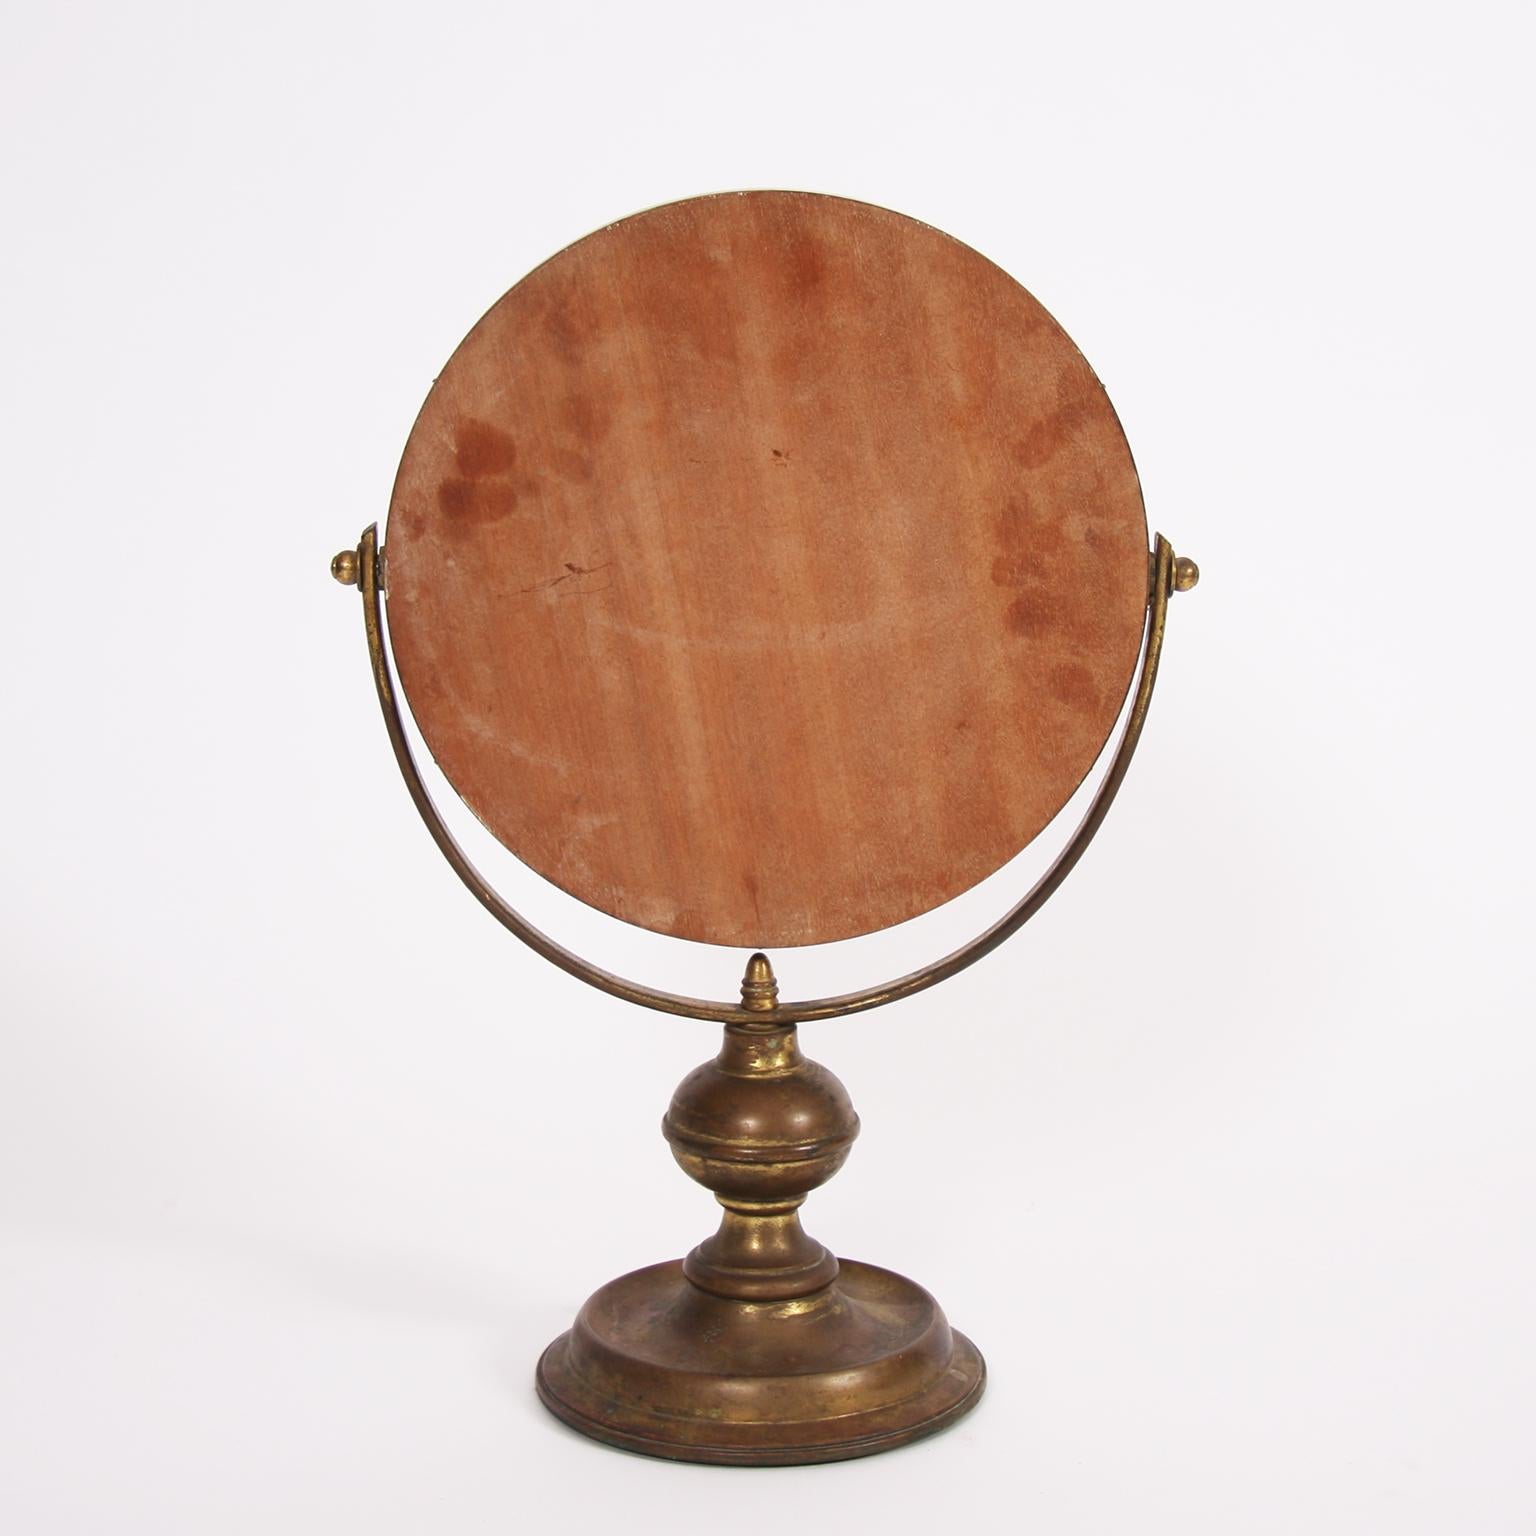 French, circa 1950.

A beautiful, circular, brass vanity mirror. Lovely patina to the brass.